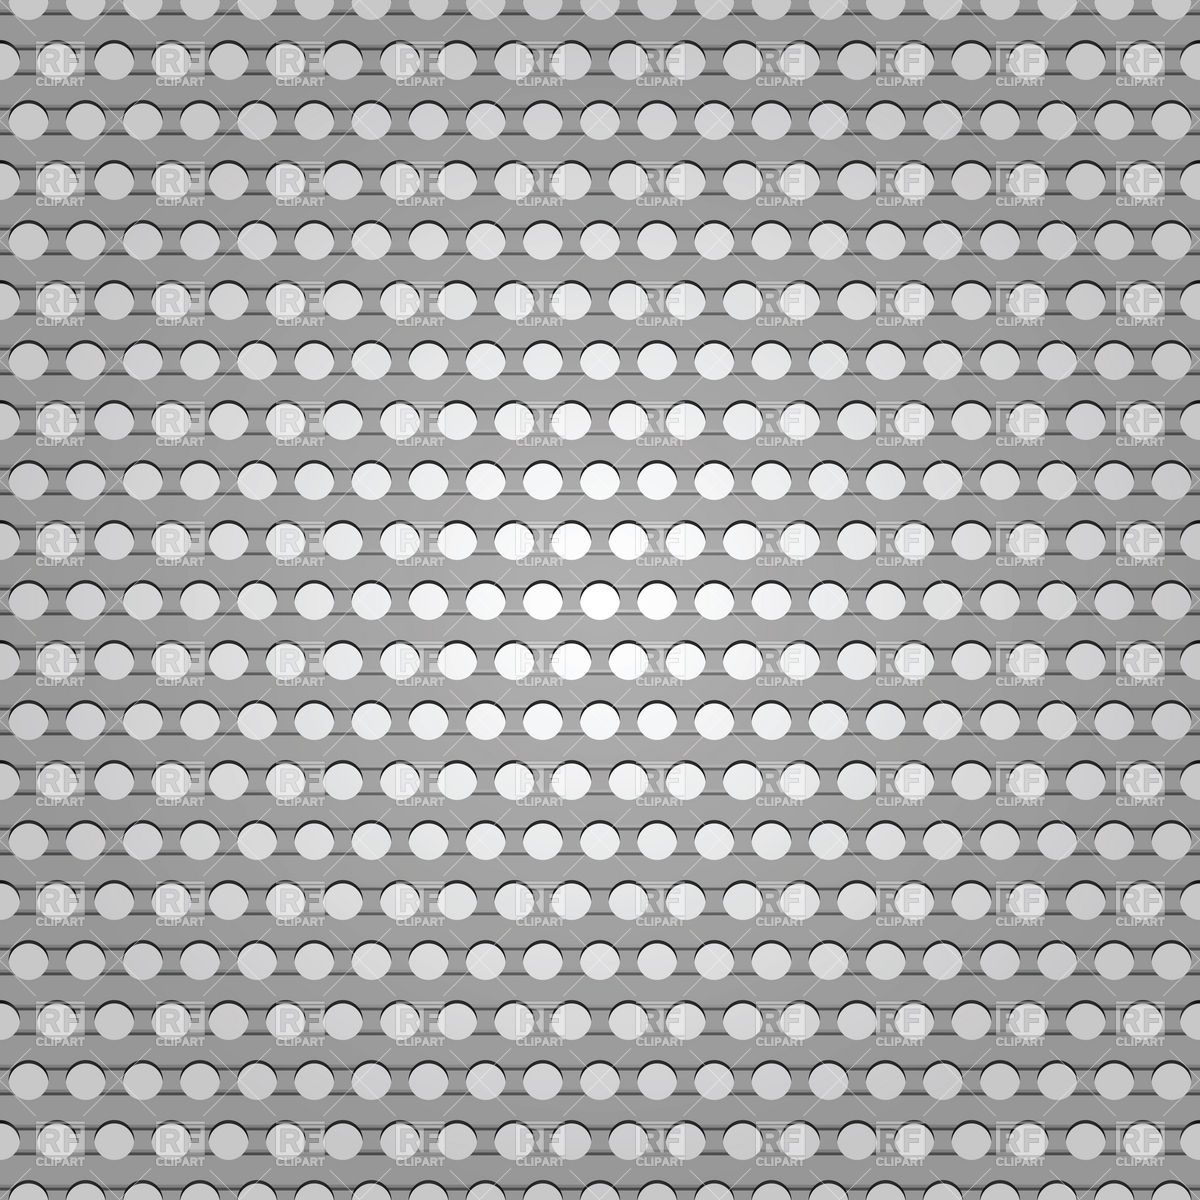 Gray Holed Metal Sheet Background Background Textures Abstract